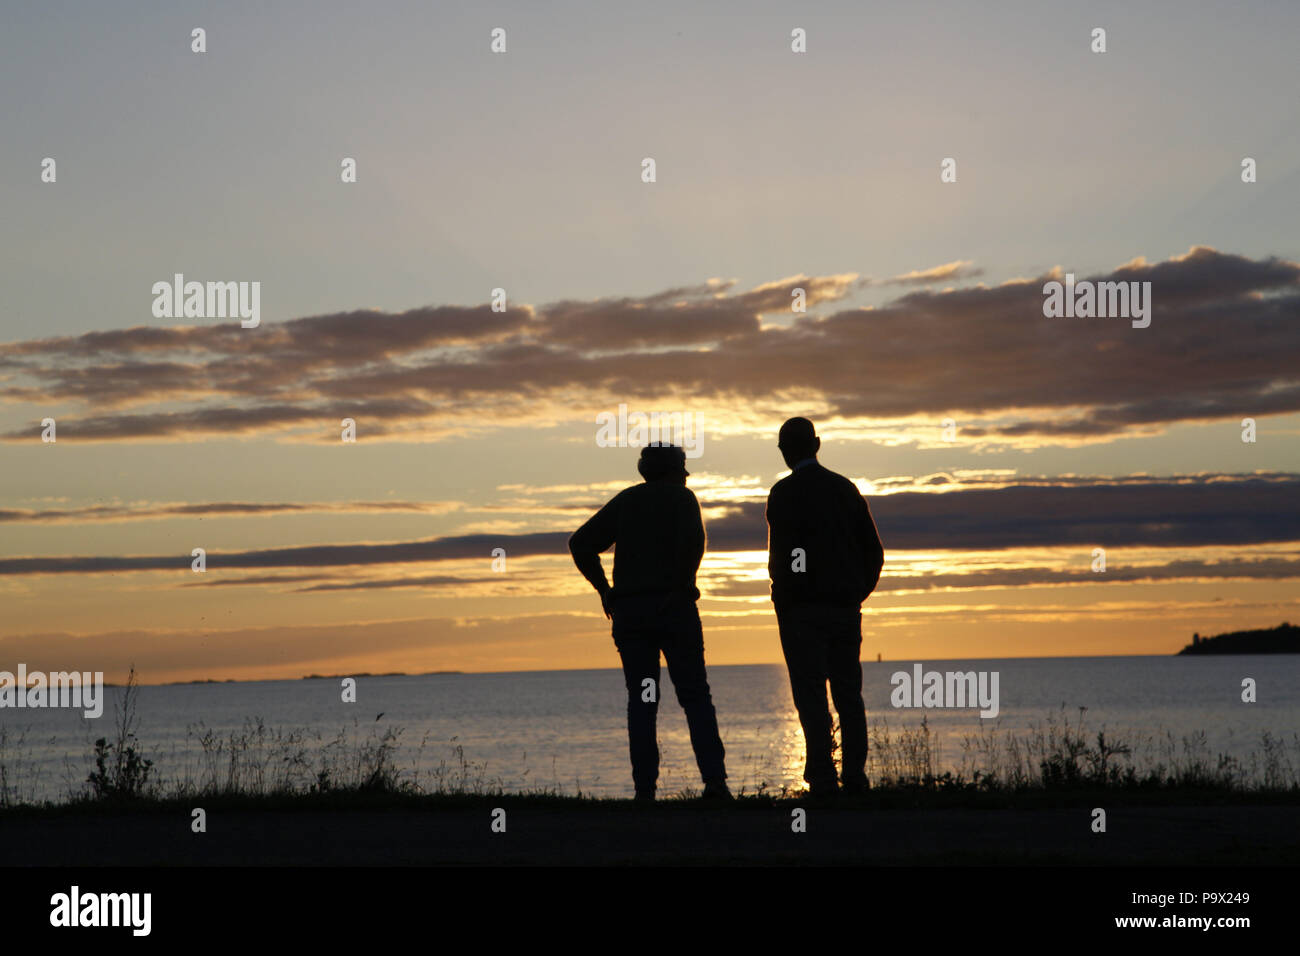 Two silhouetted people at sunset Stock Photo